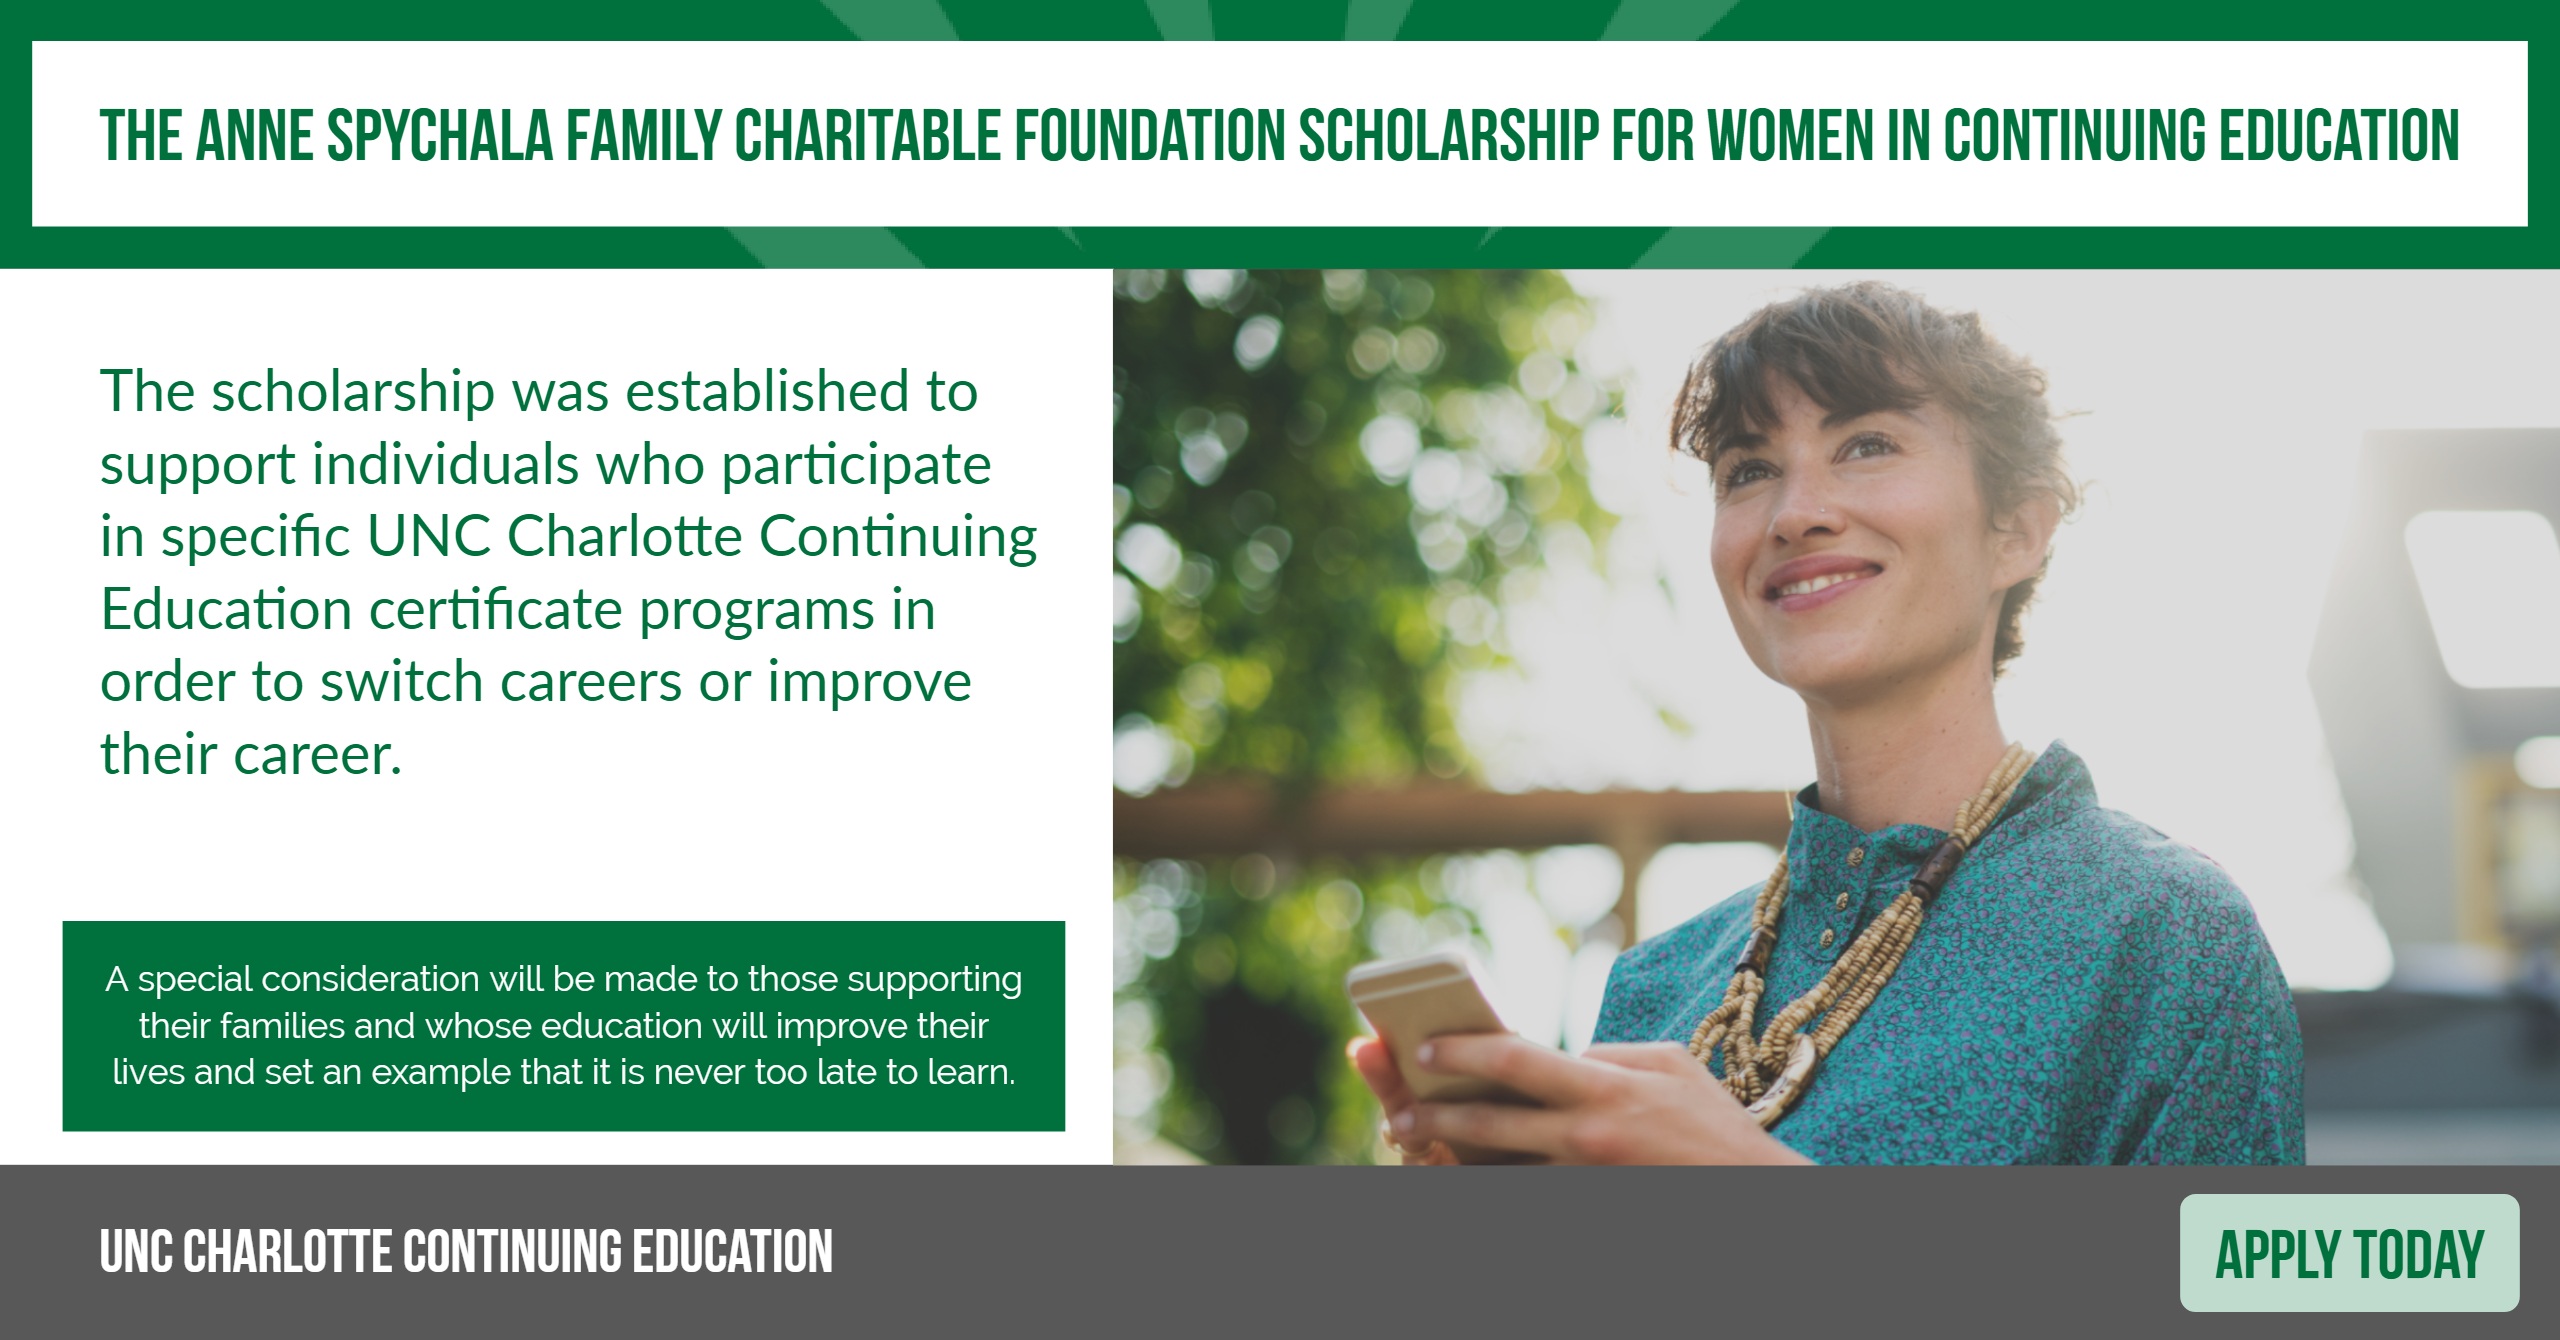 The Anne Spychala Family Charitable Foundation Scholarship for Women in Continuing Education provides scholarships for individuals who are switching careers or improving their career potential.